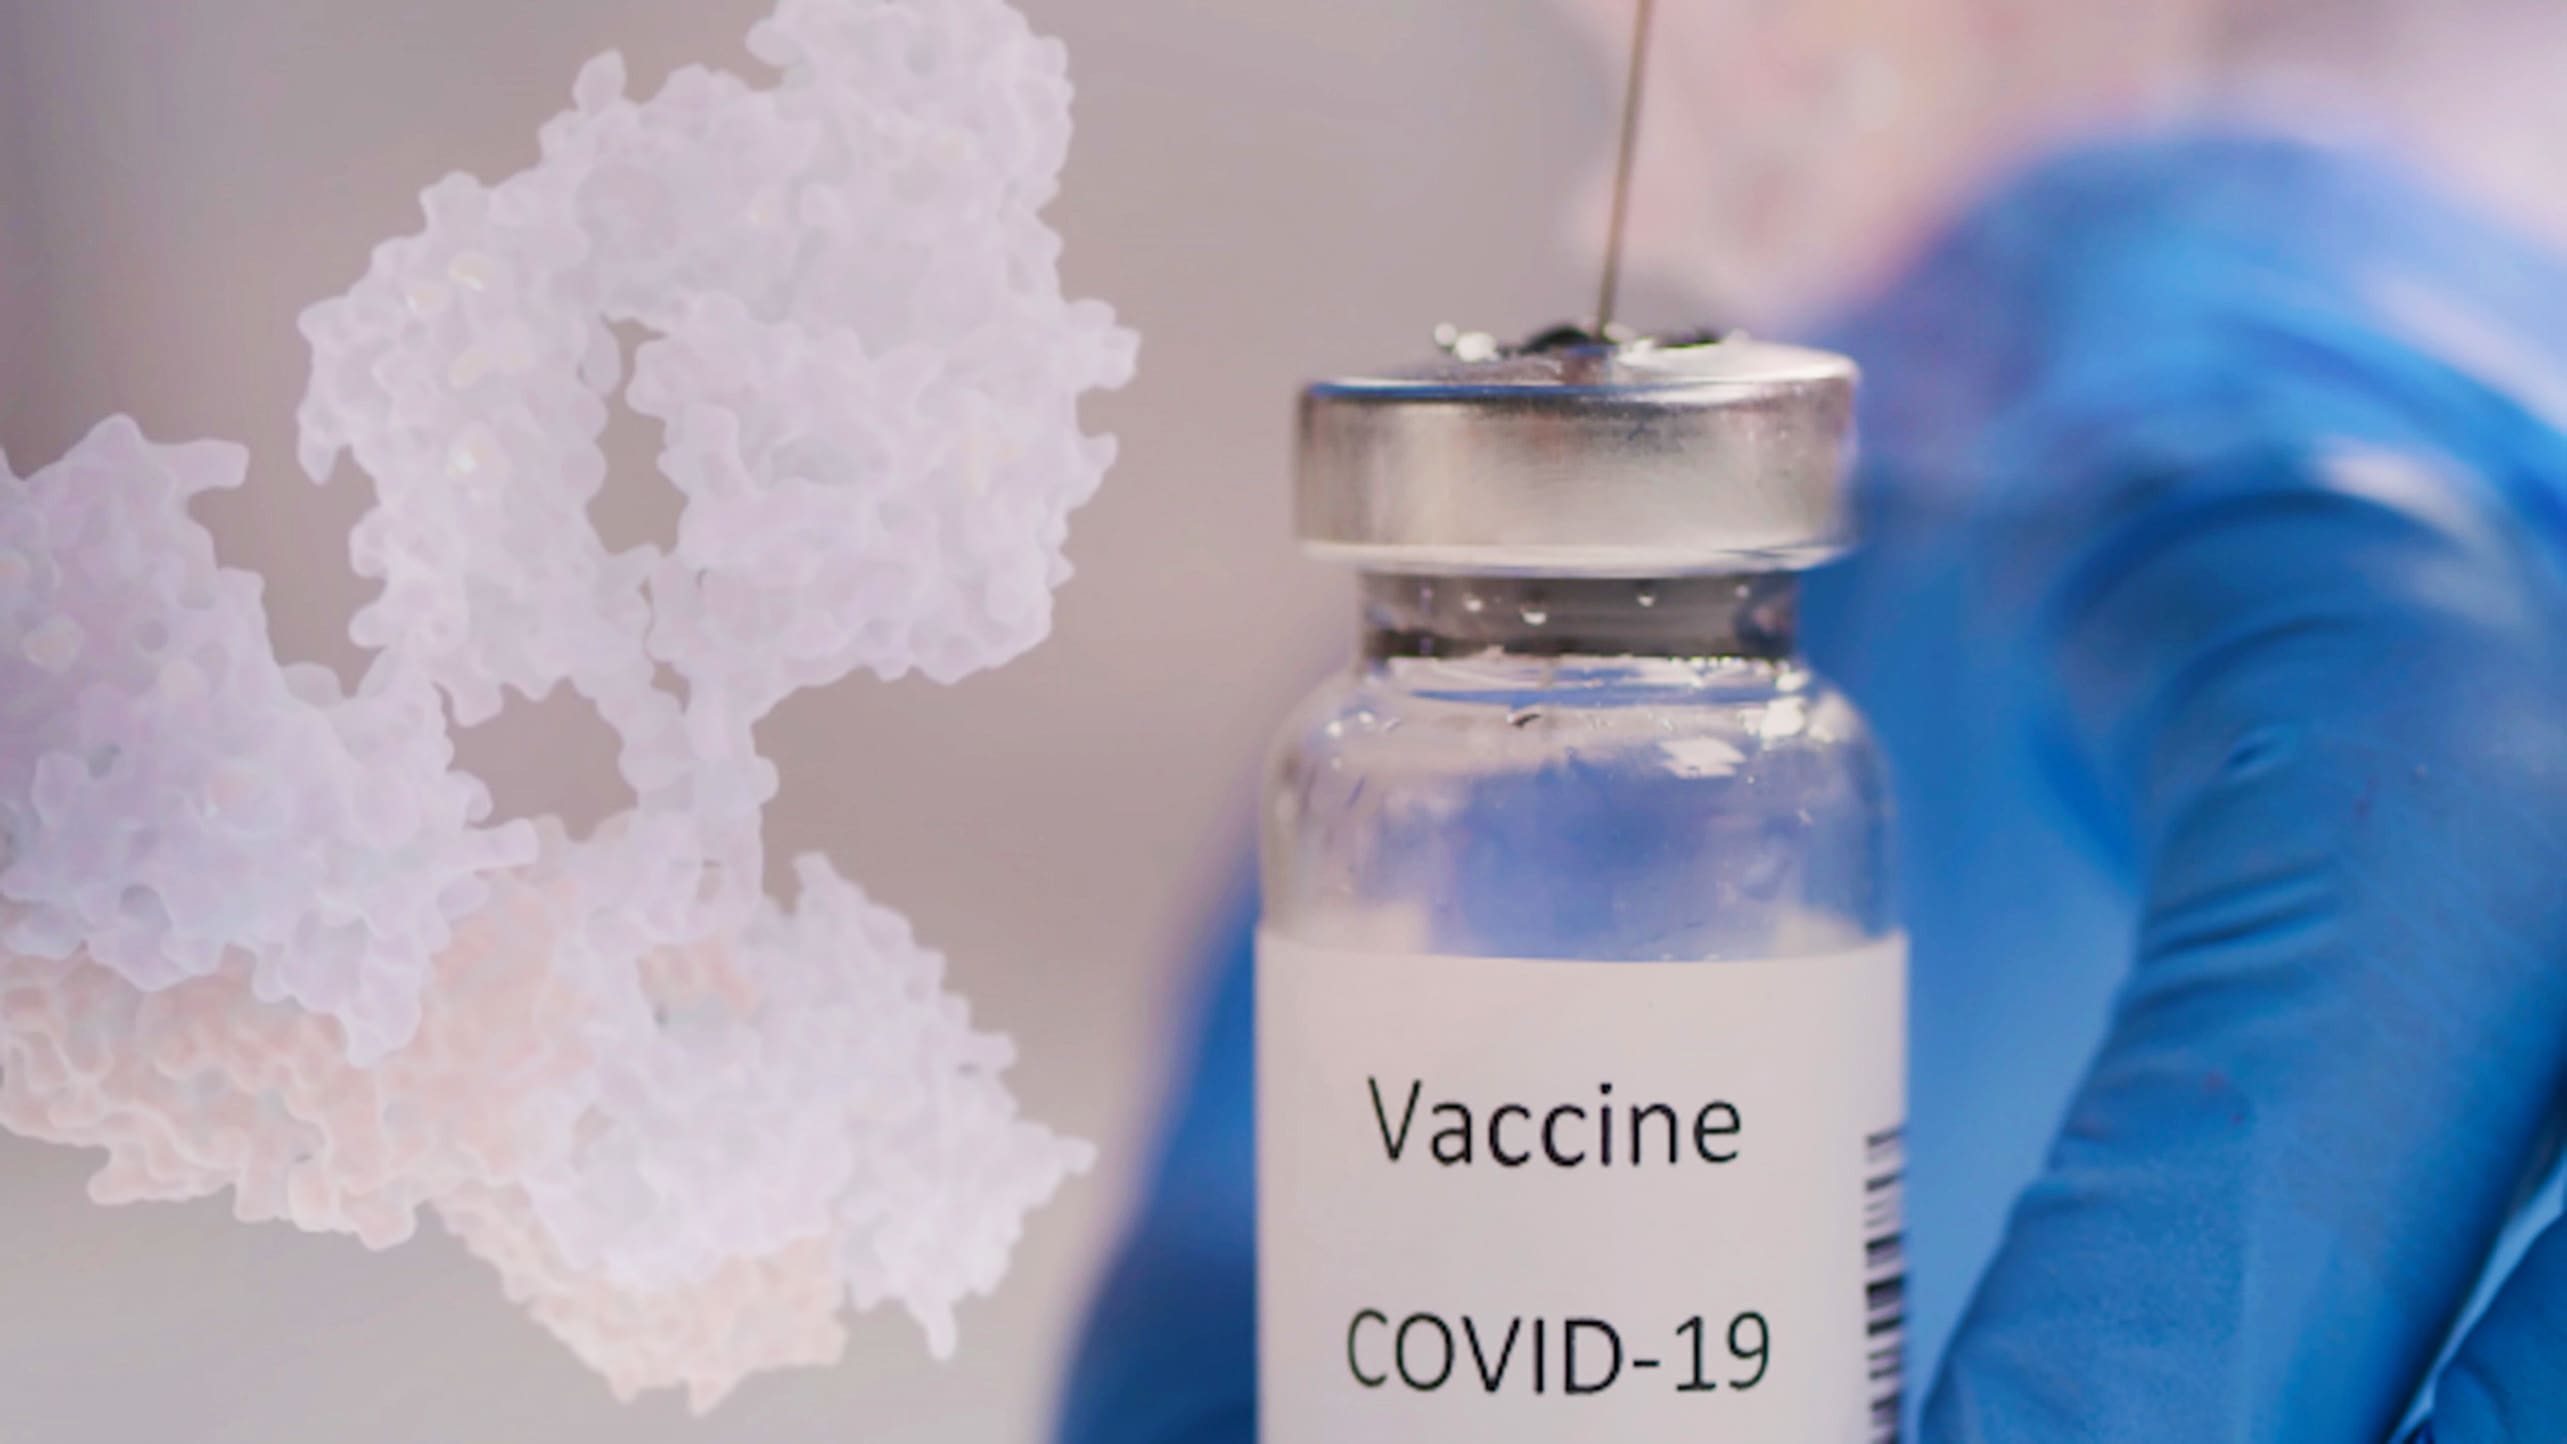 A syringe goes into a vial containing the COVID-19 vaccine.